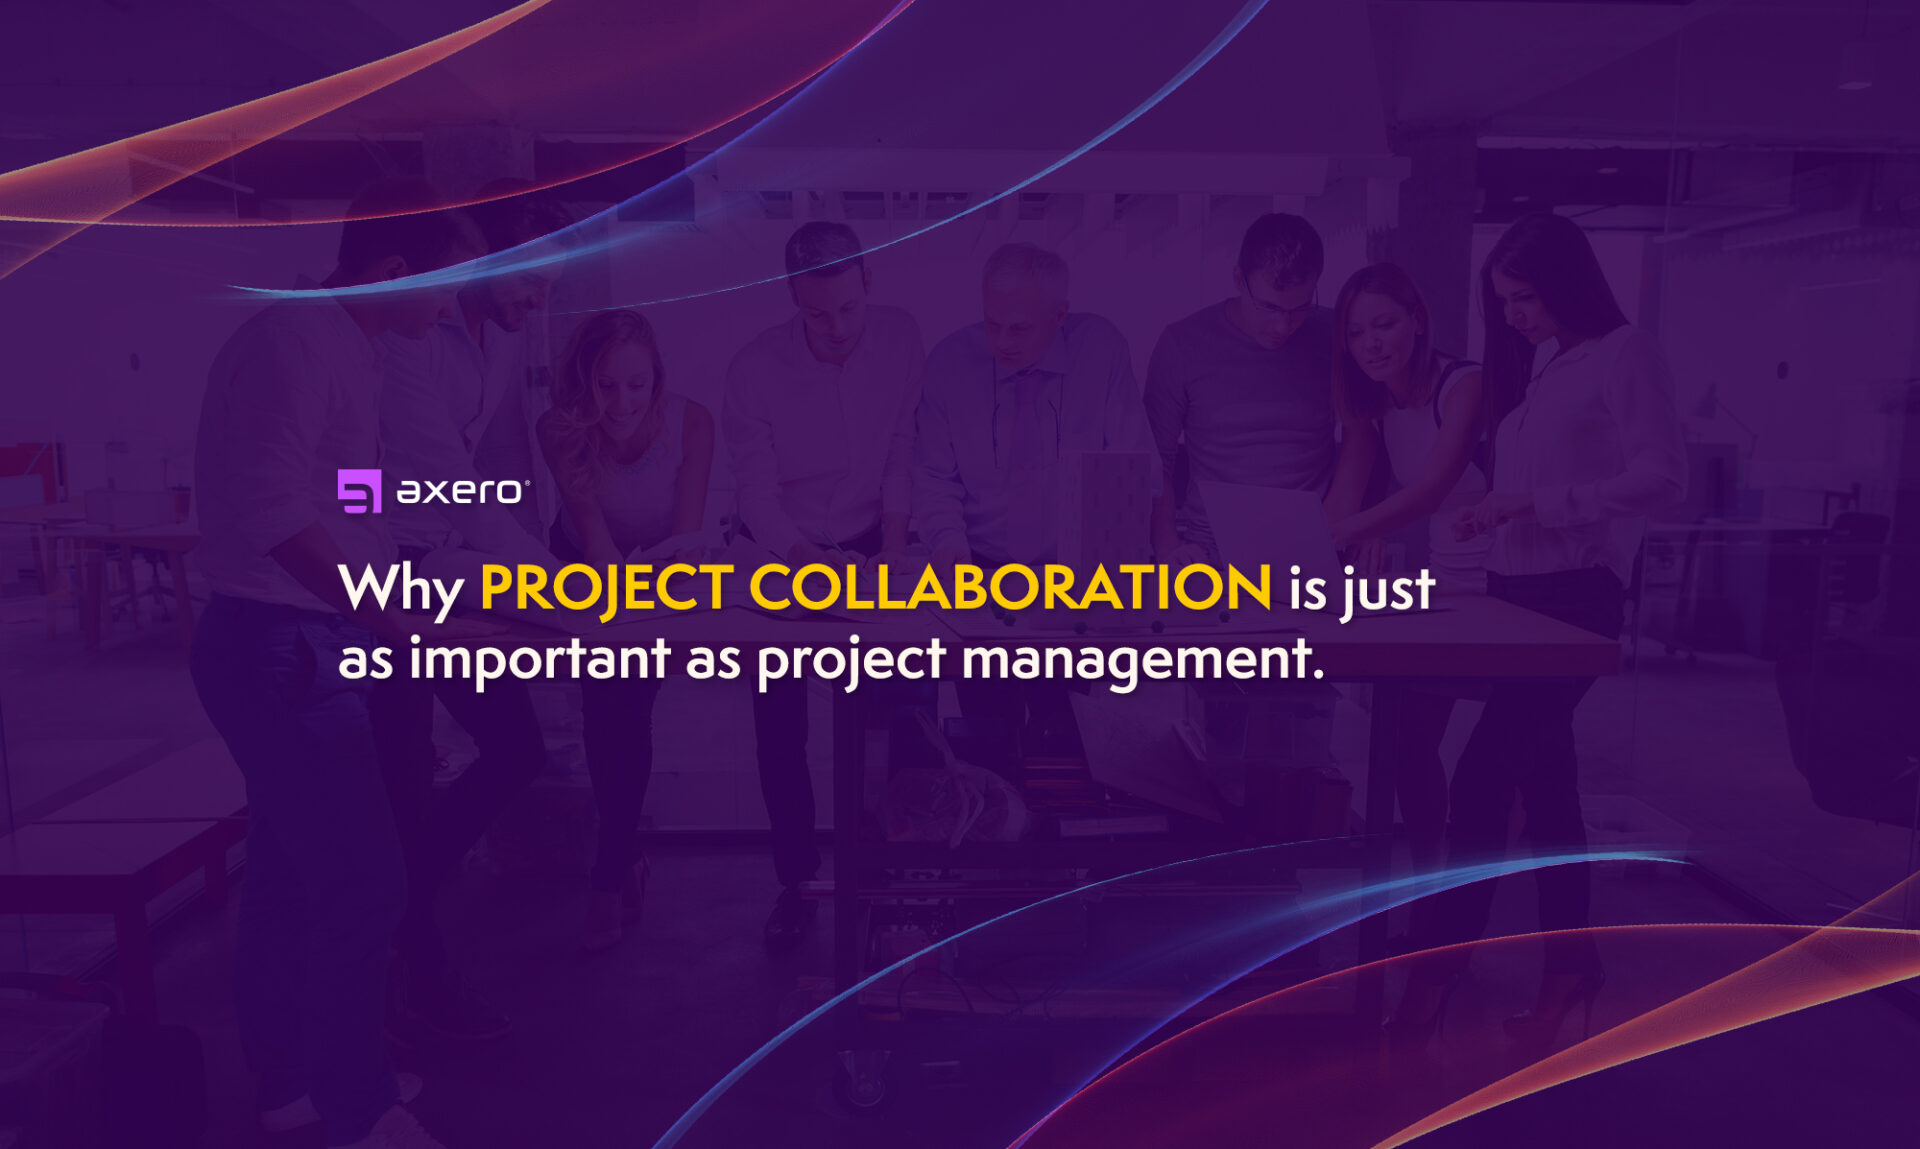 Here’s Why Project Collaboration is Just as Important as Project Management